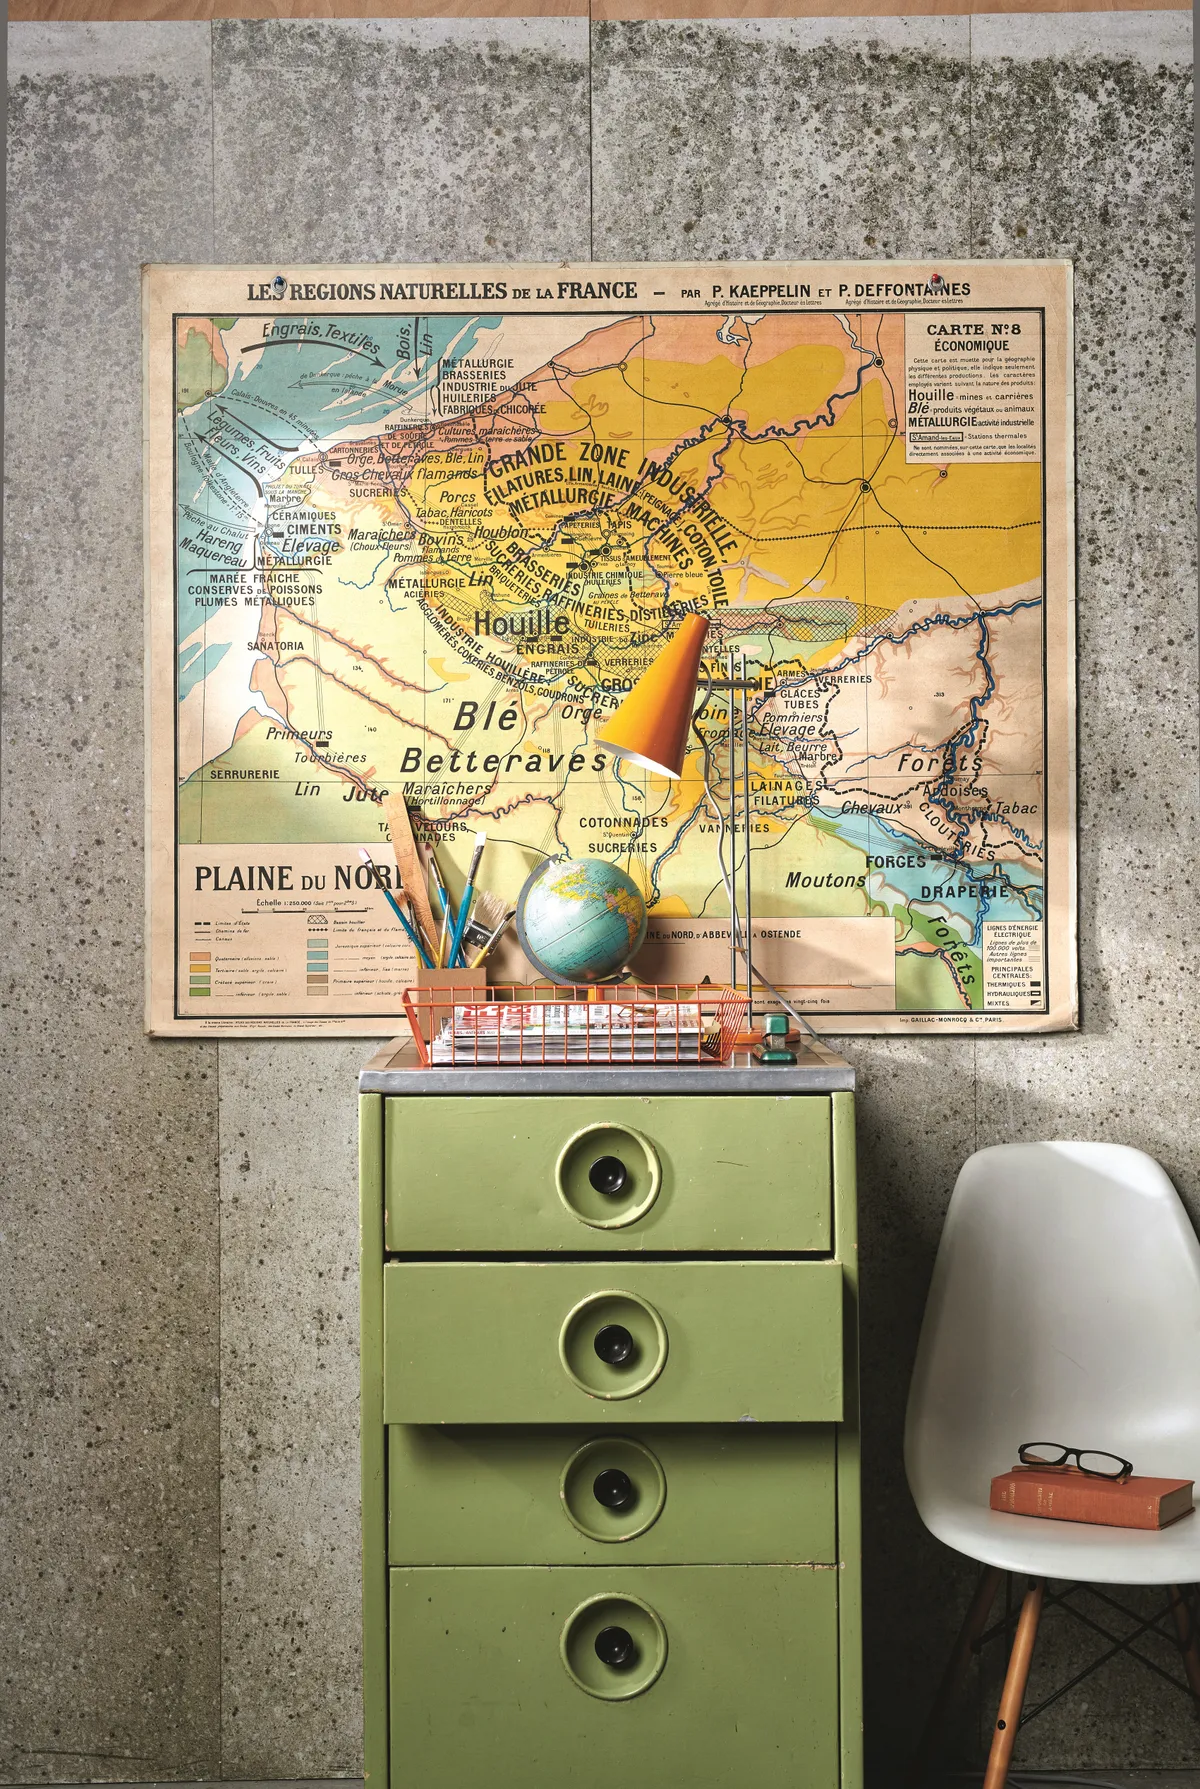 A vintage orange wire tray atop a green metal filing cabinet.